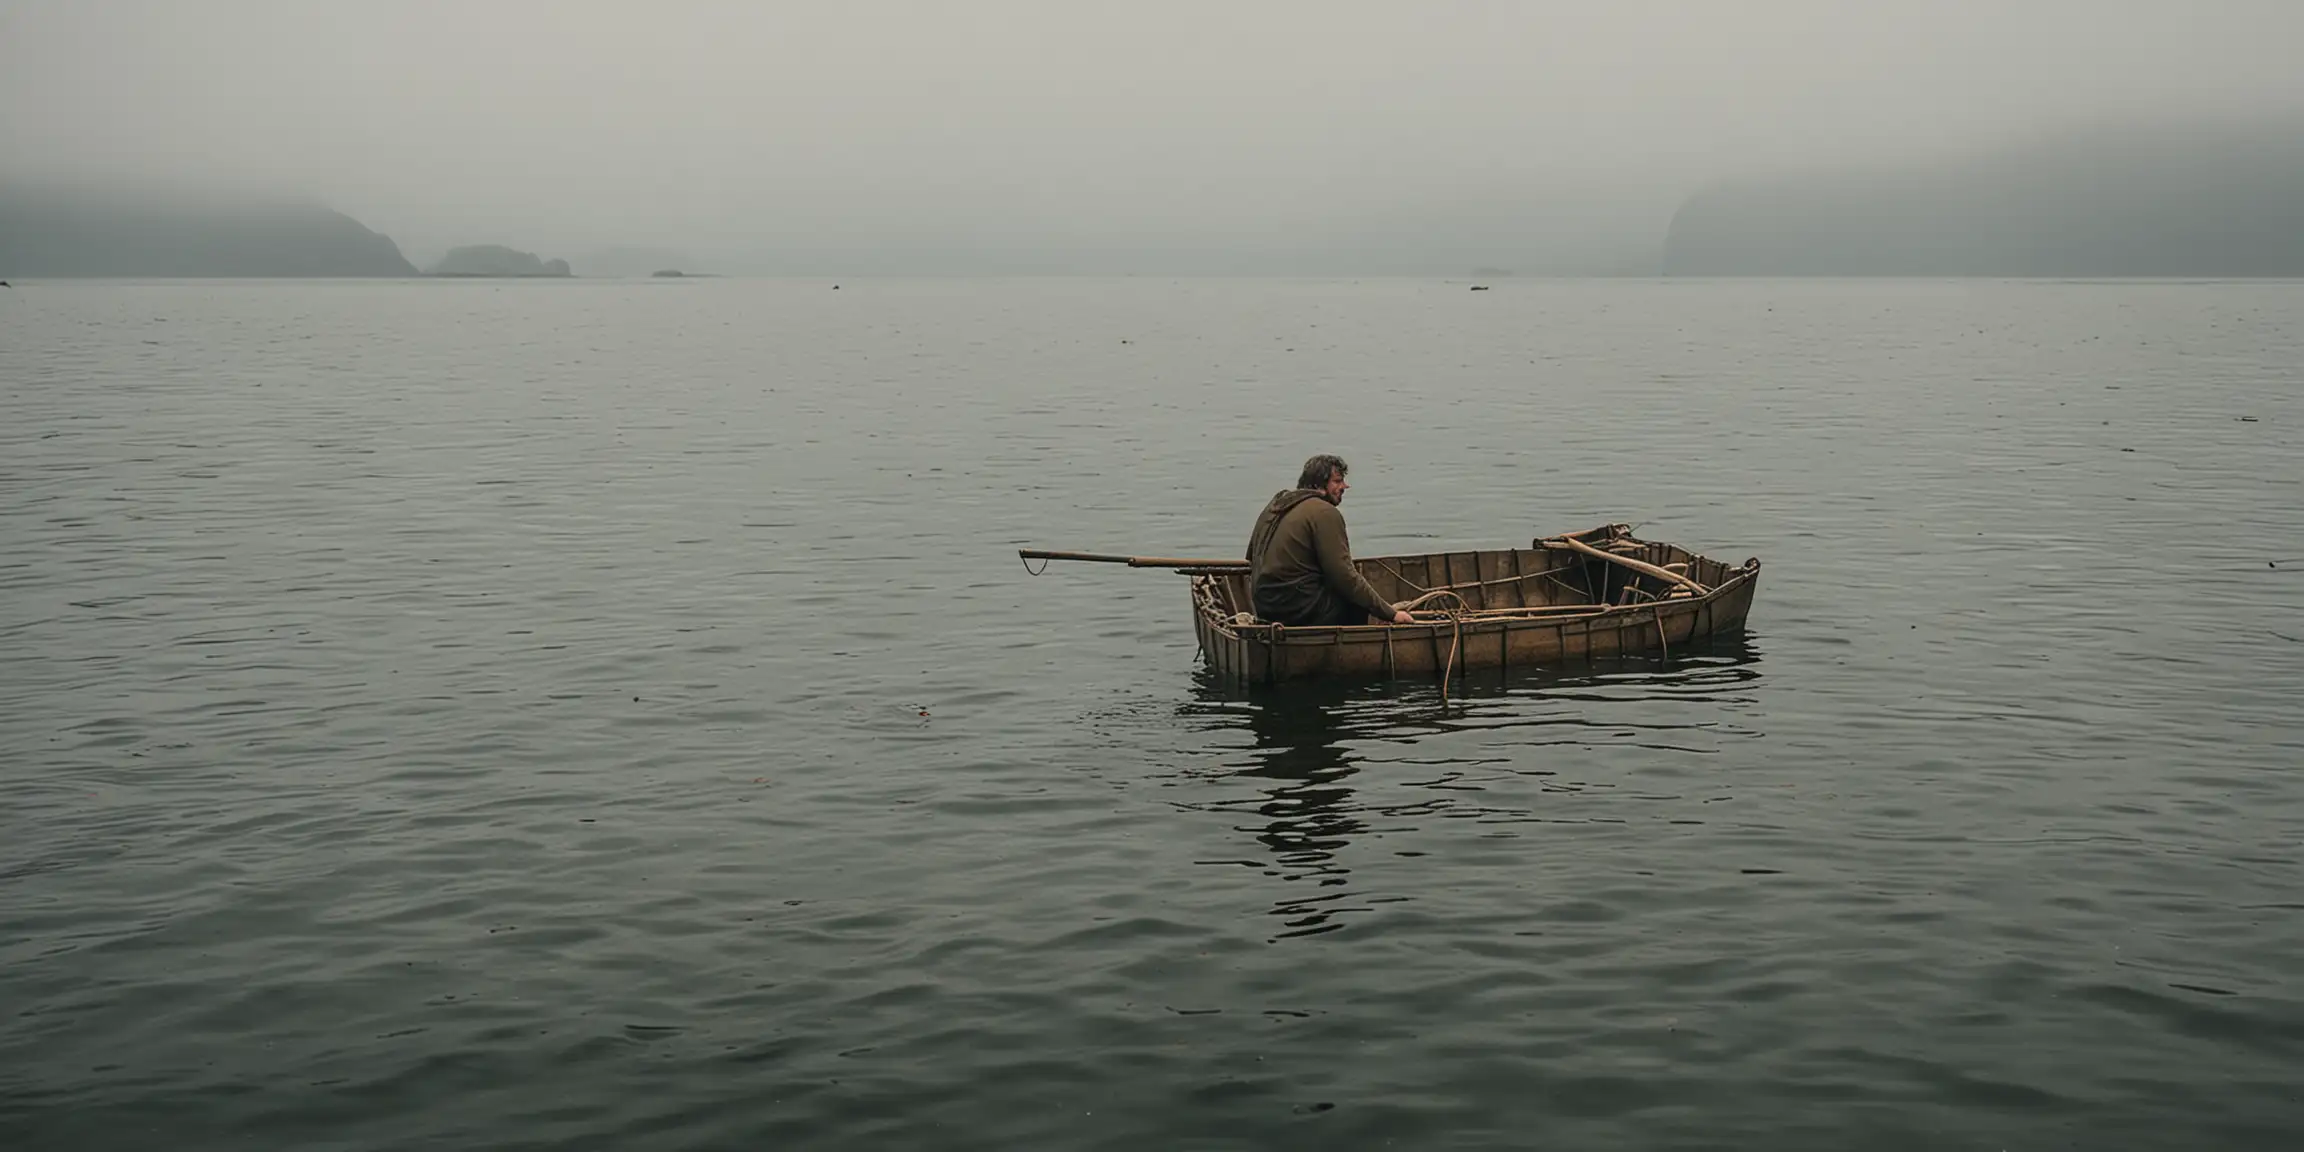 man left alone in small old raft i the midle of the sea
